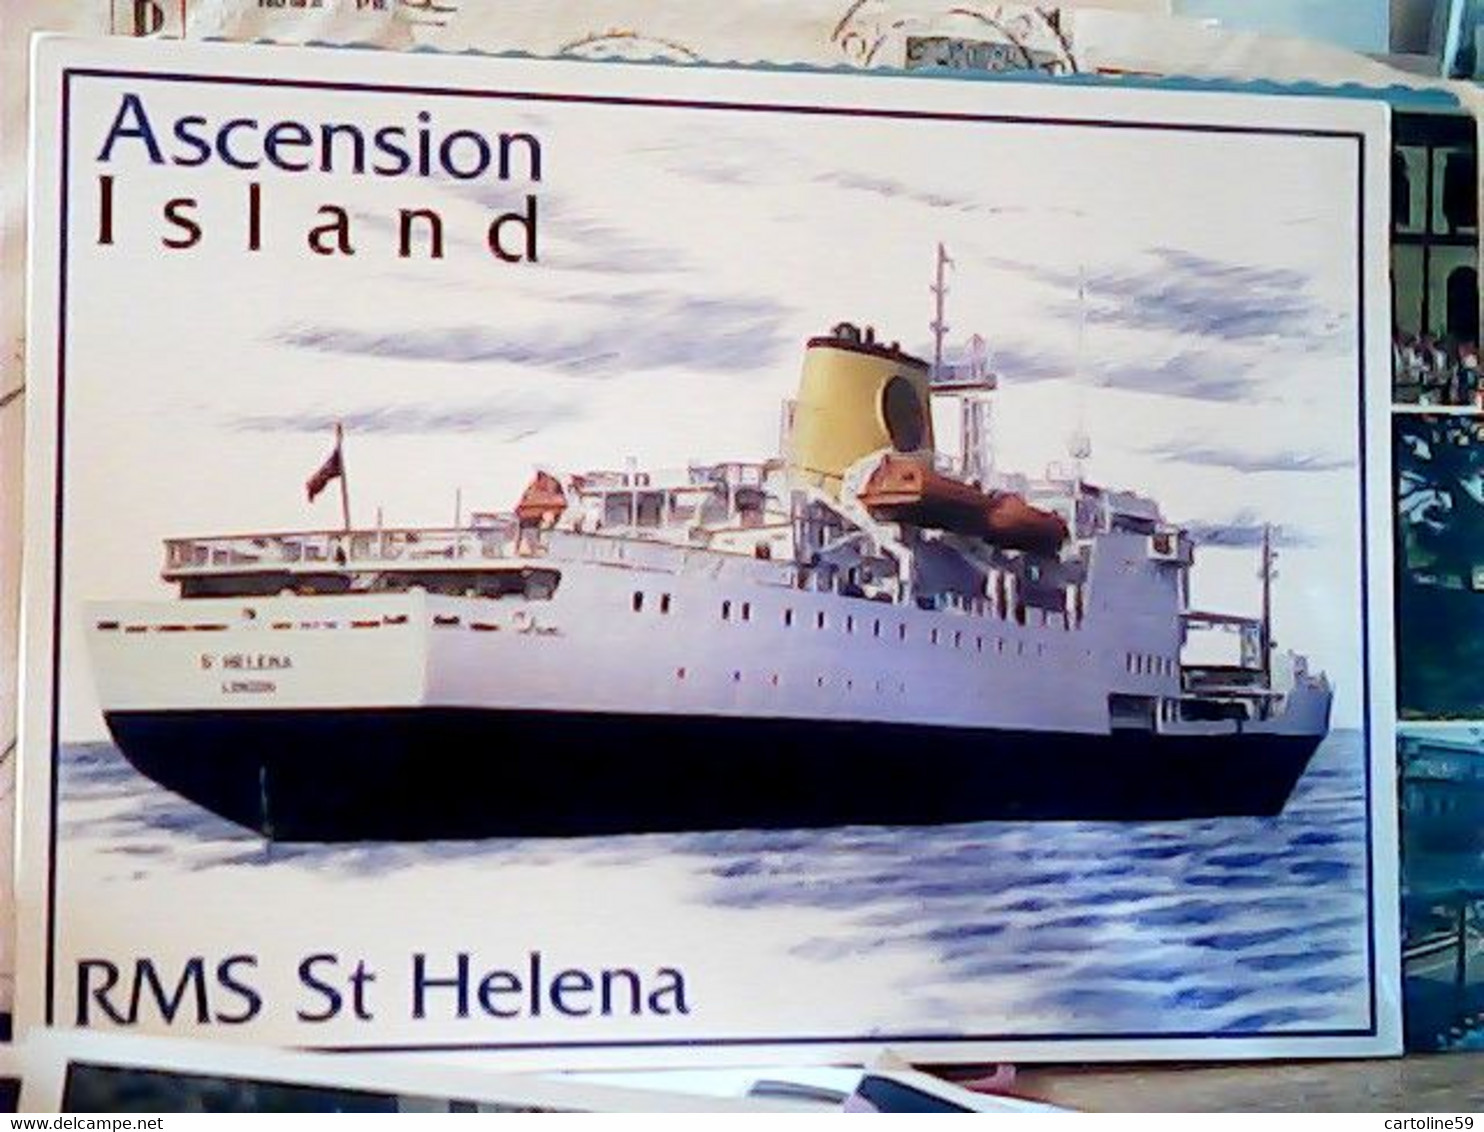 ASCENSION ISLAND NAVE SHIP FERRY  RMS ST HELENA N2000 JG9478 - Ascension